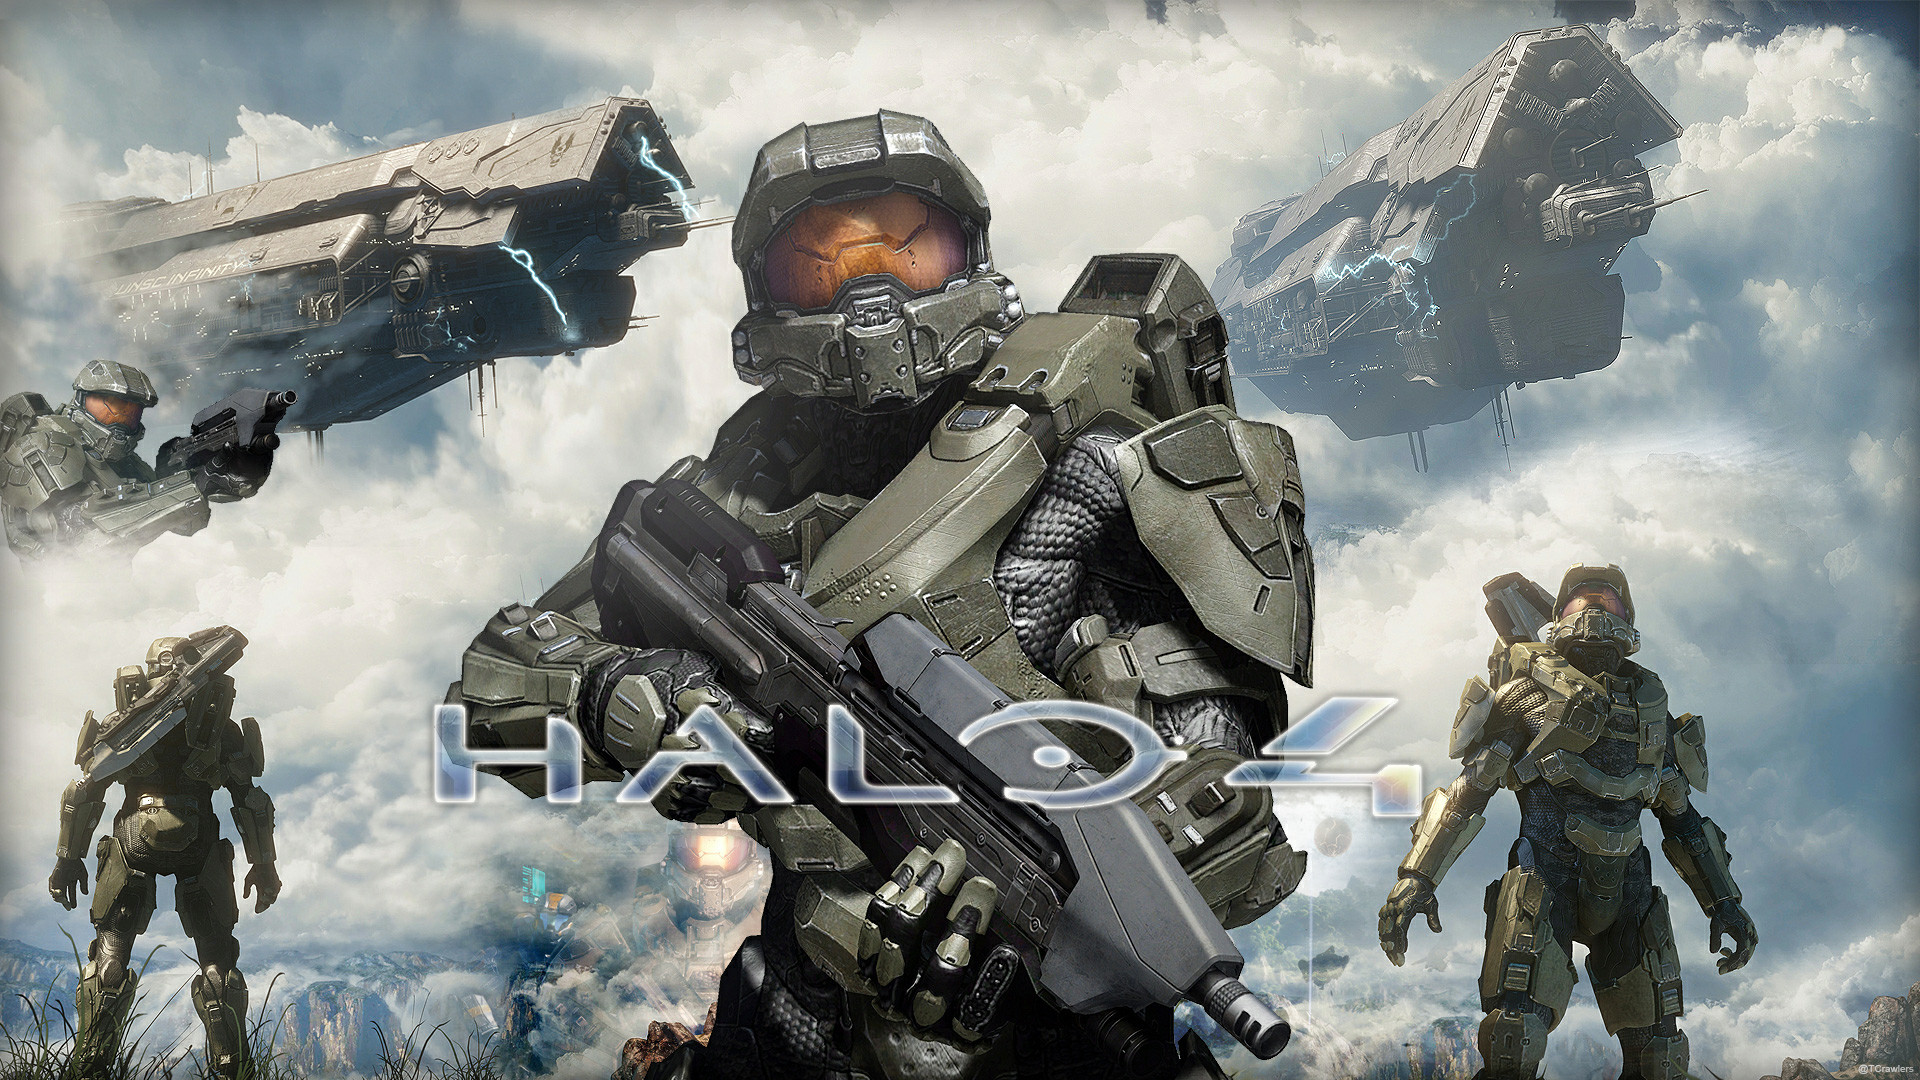 1920x1080 Awesome Halo wallpaper | Halo wallpapers